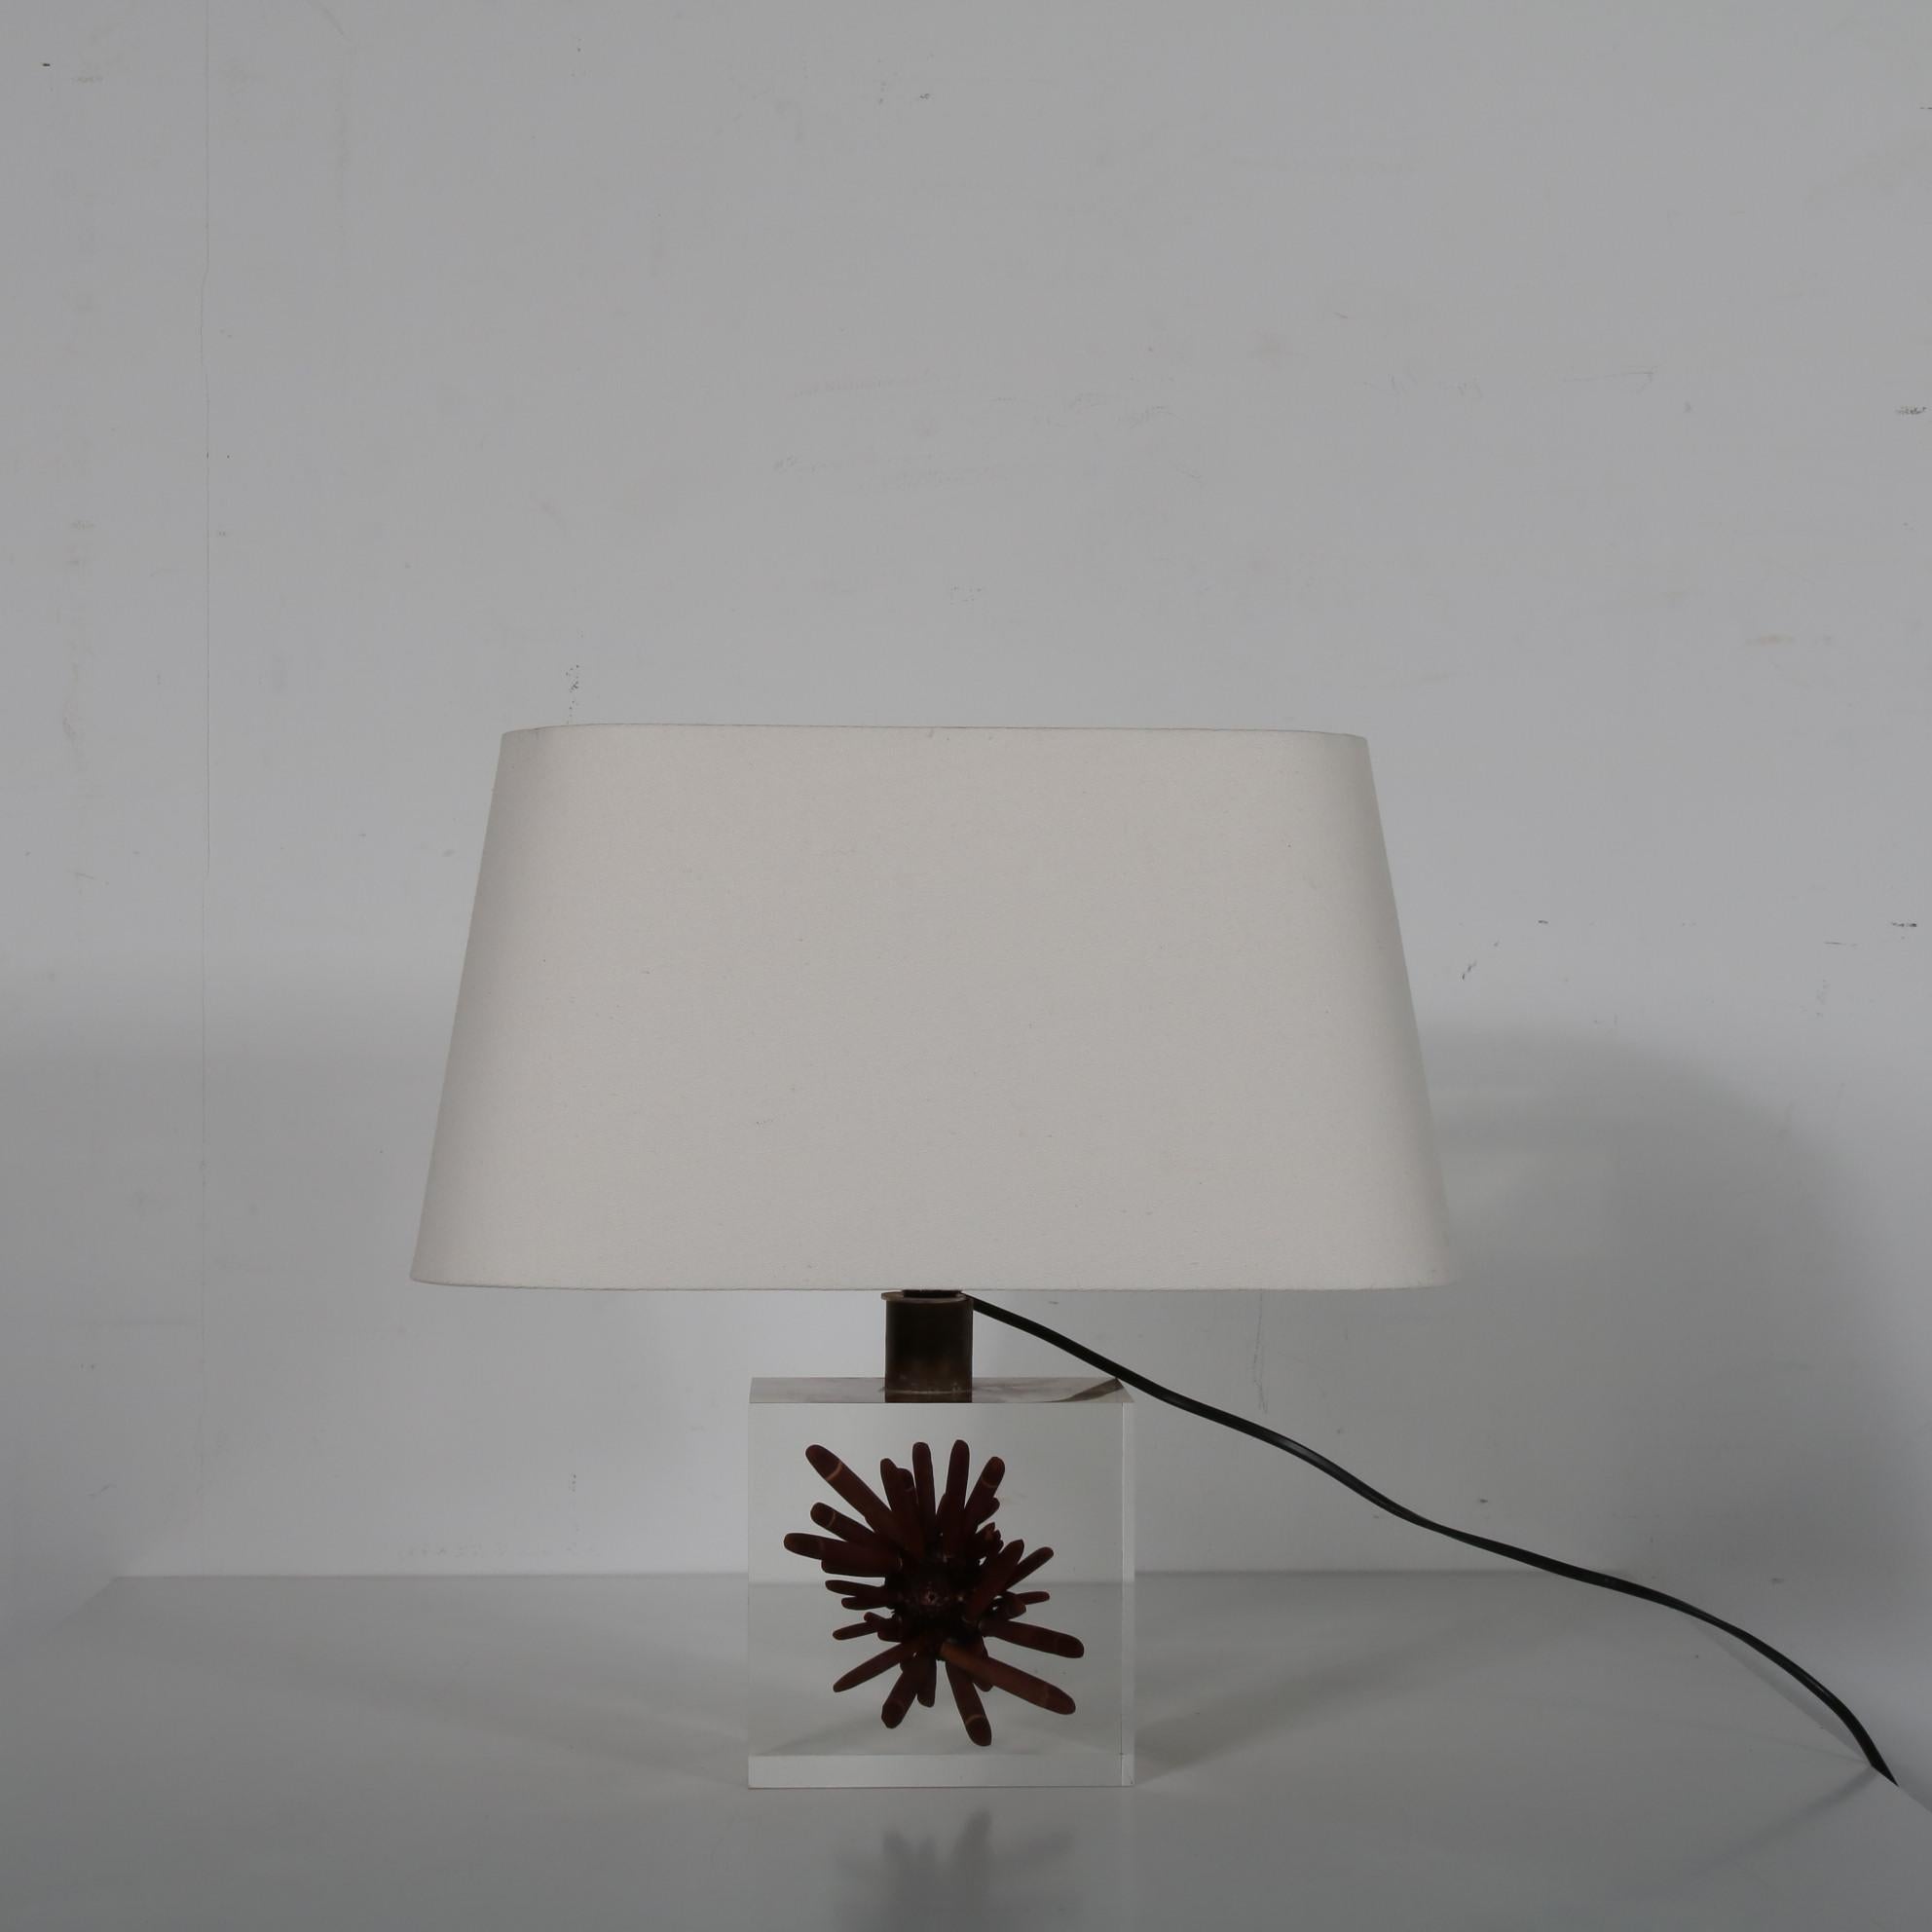 Pierre Giraudon Resin with Coral Table Lamp, France 1970 For Sale 3